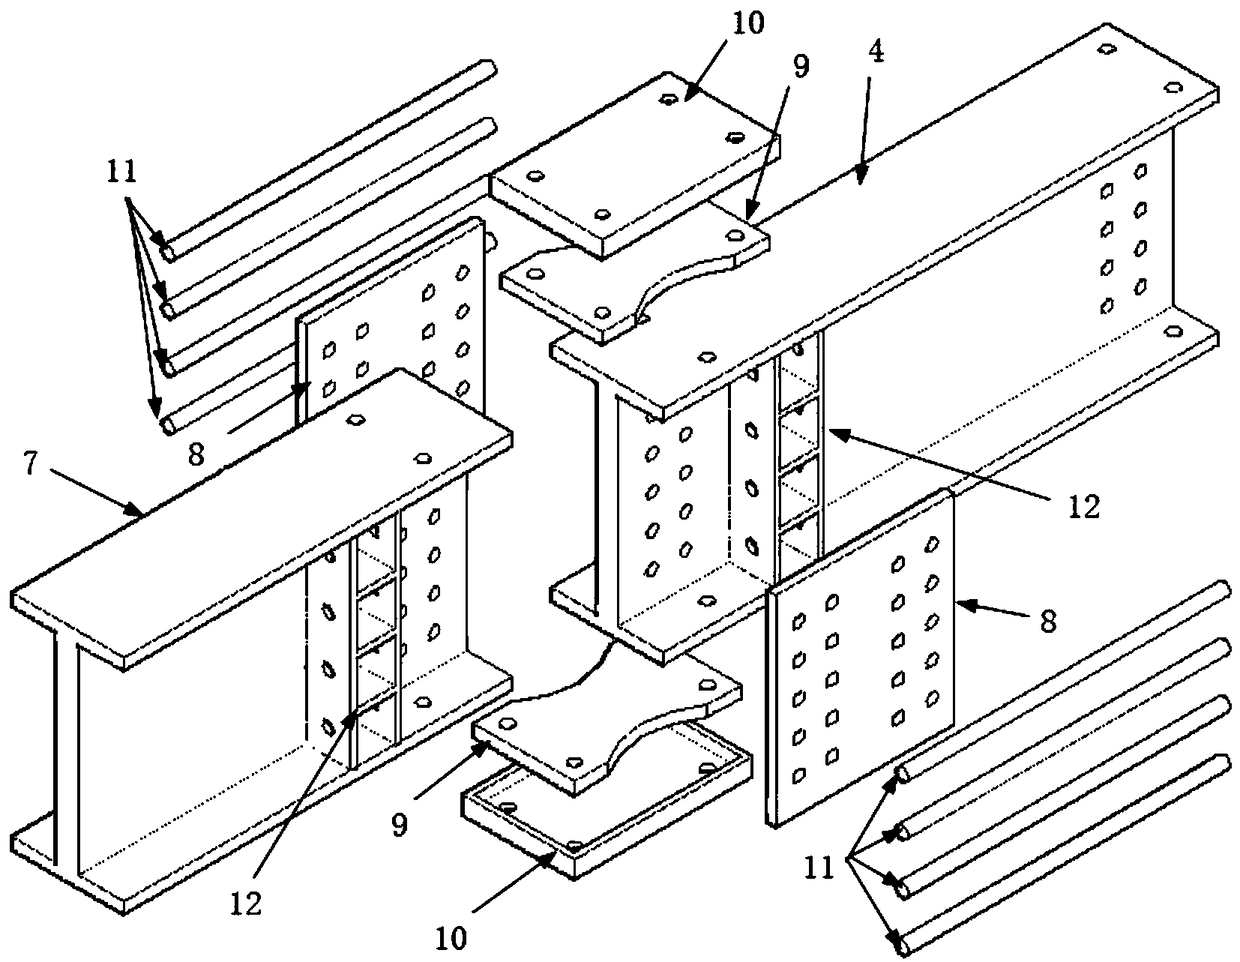 Assembling multi-section beam center support steel frame capable of self-centering after earthquake